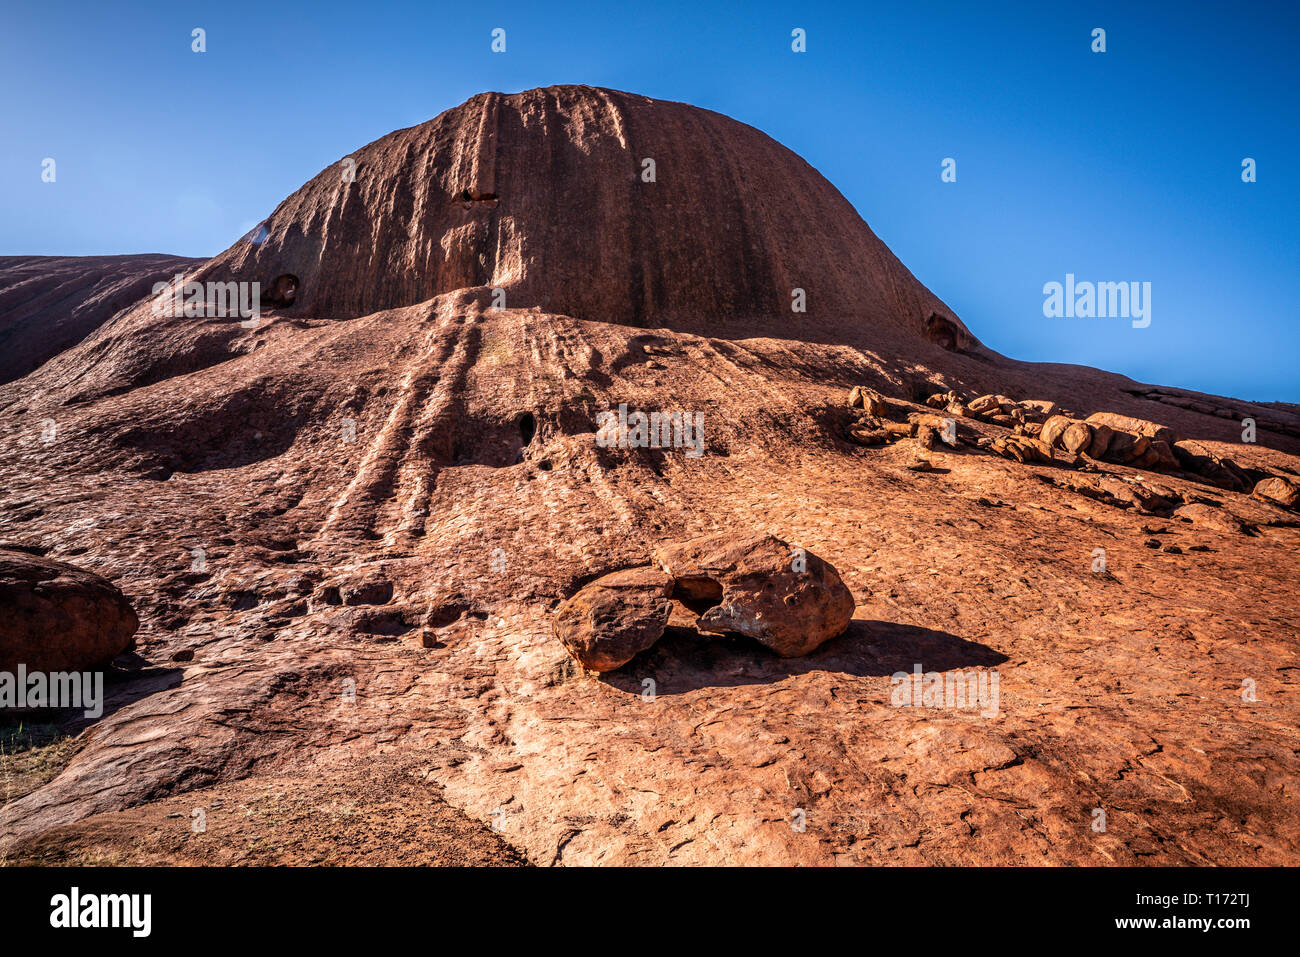 View of Kuniya Piti giant red rock during the Lungkata walk in NT outback Australia Stock Photo